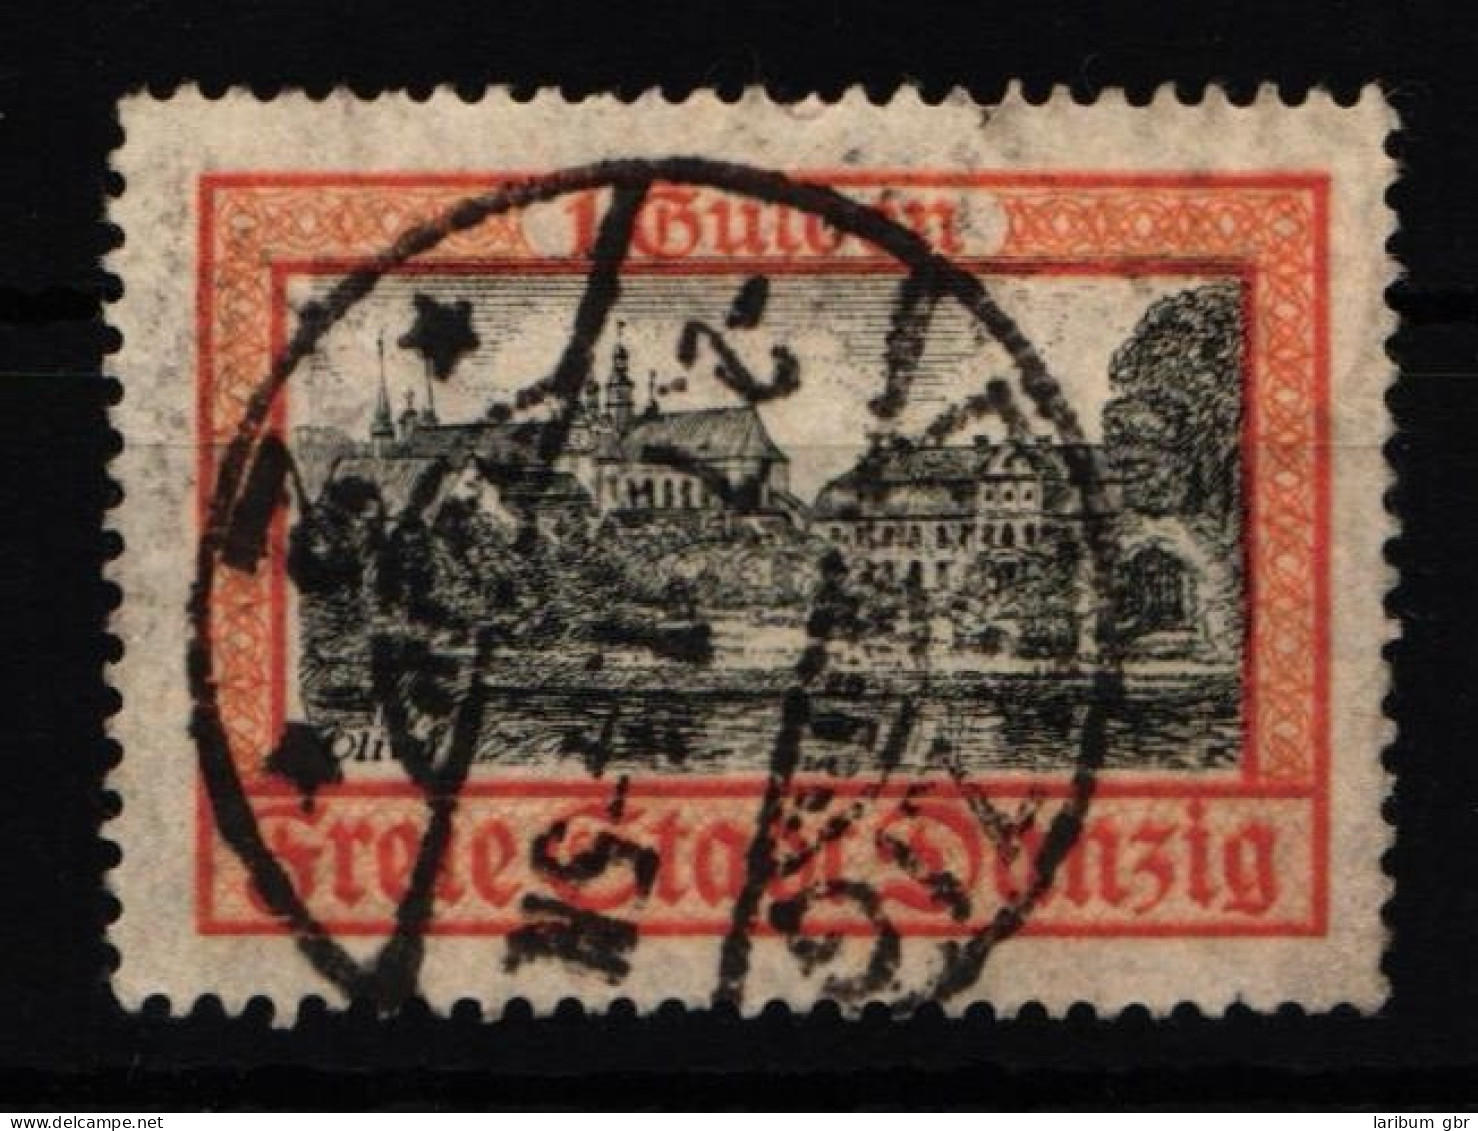 Danzig 212 A Gestempelt #IS293 - Used